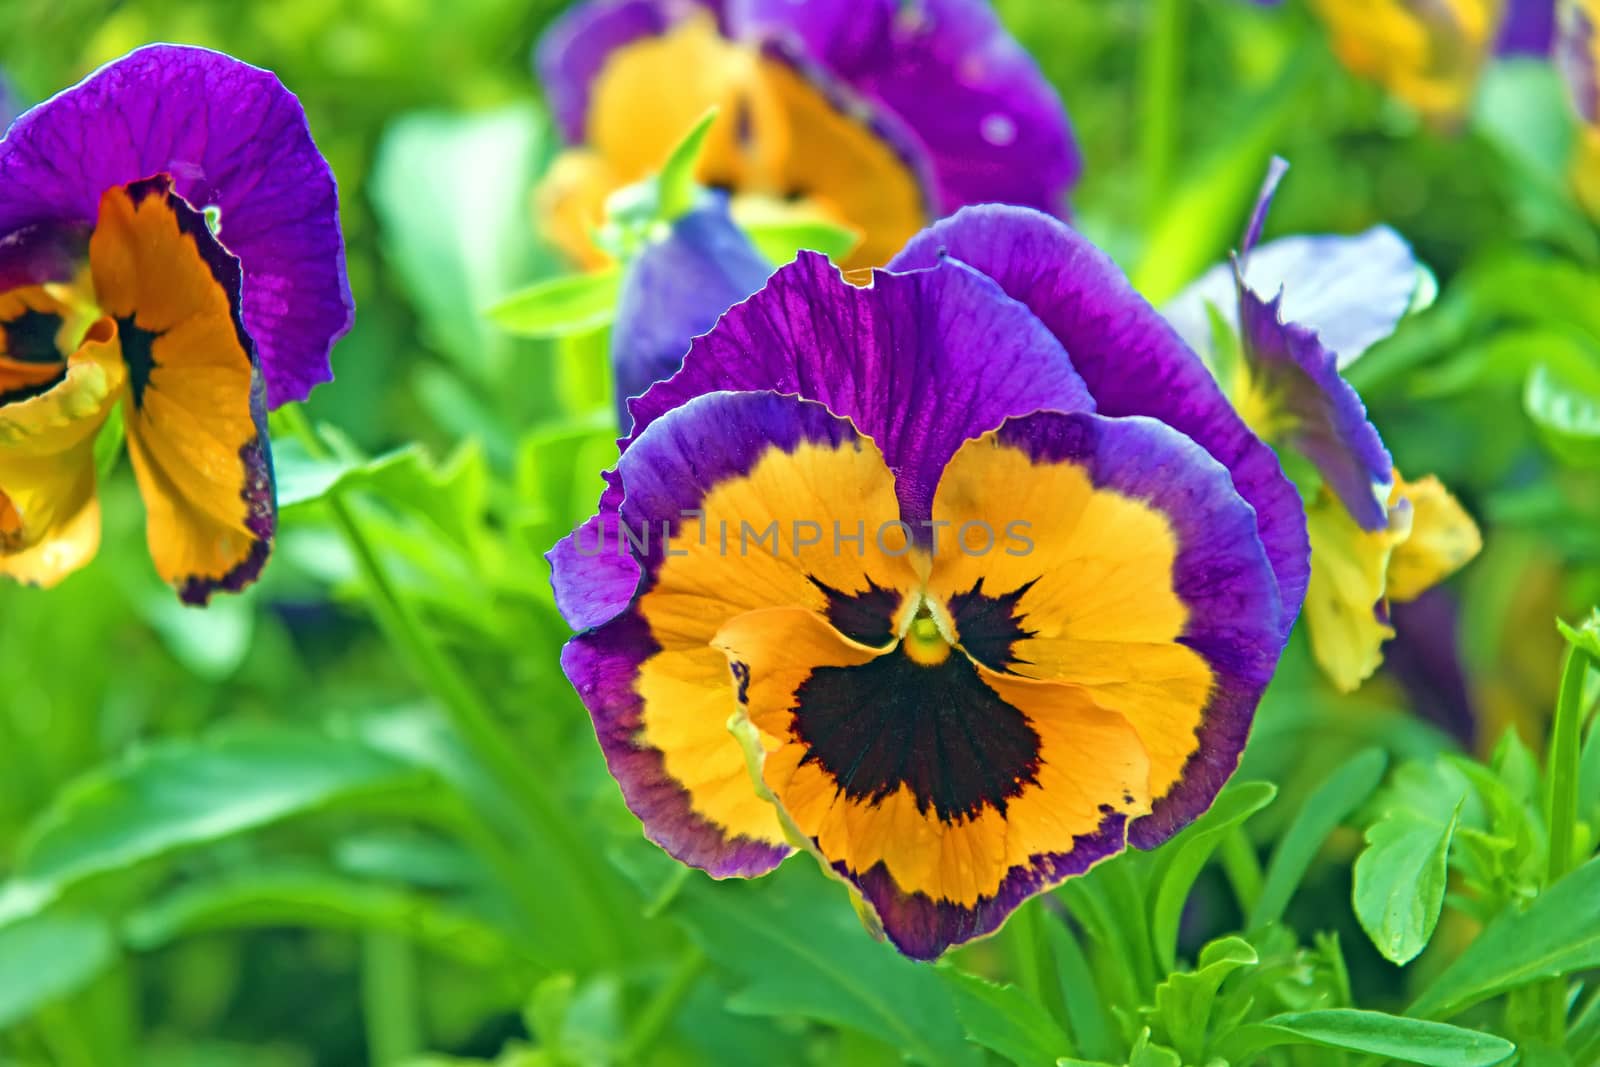 A close-up of a pansy in spring.